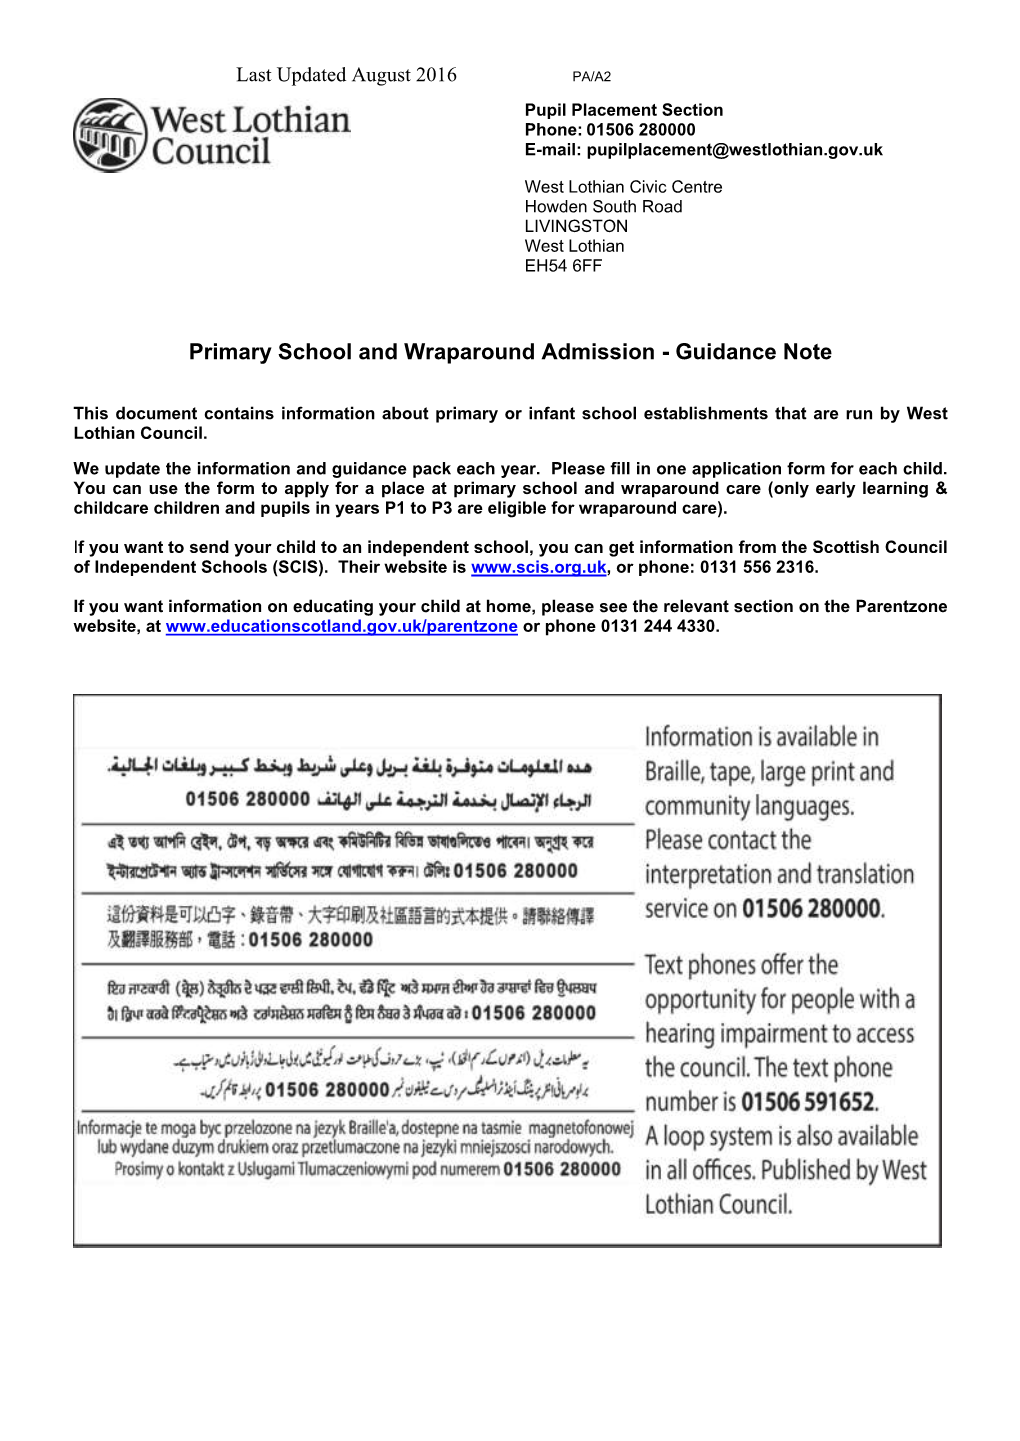 Primary School and Wraparound Admission - Guidance Note